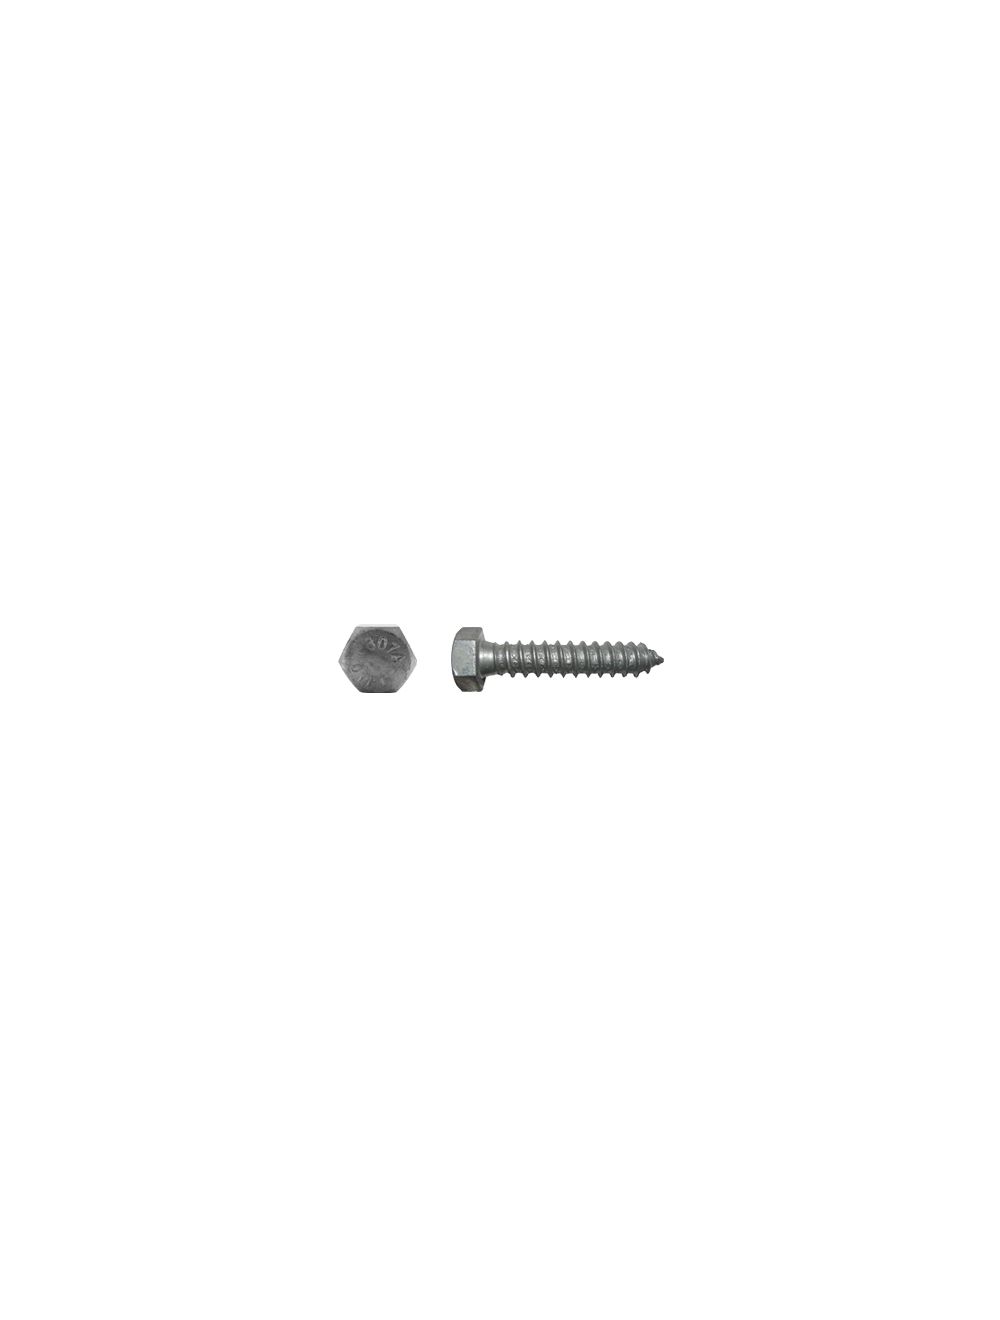 New Package of 500 1/4 x 5 Hex Lag Screws Hot Dip Galvanized Set #TR-3596F Warranity by Pr-Mch pcs 